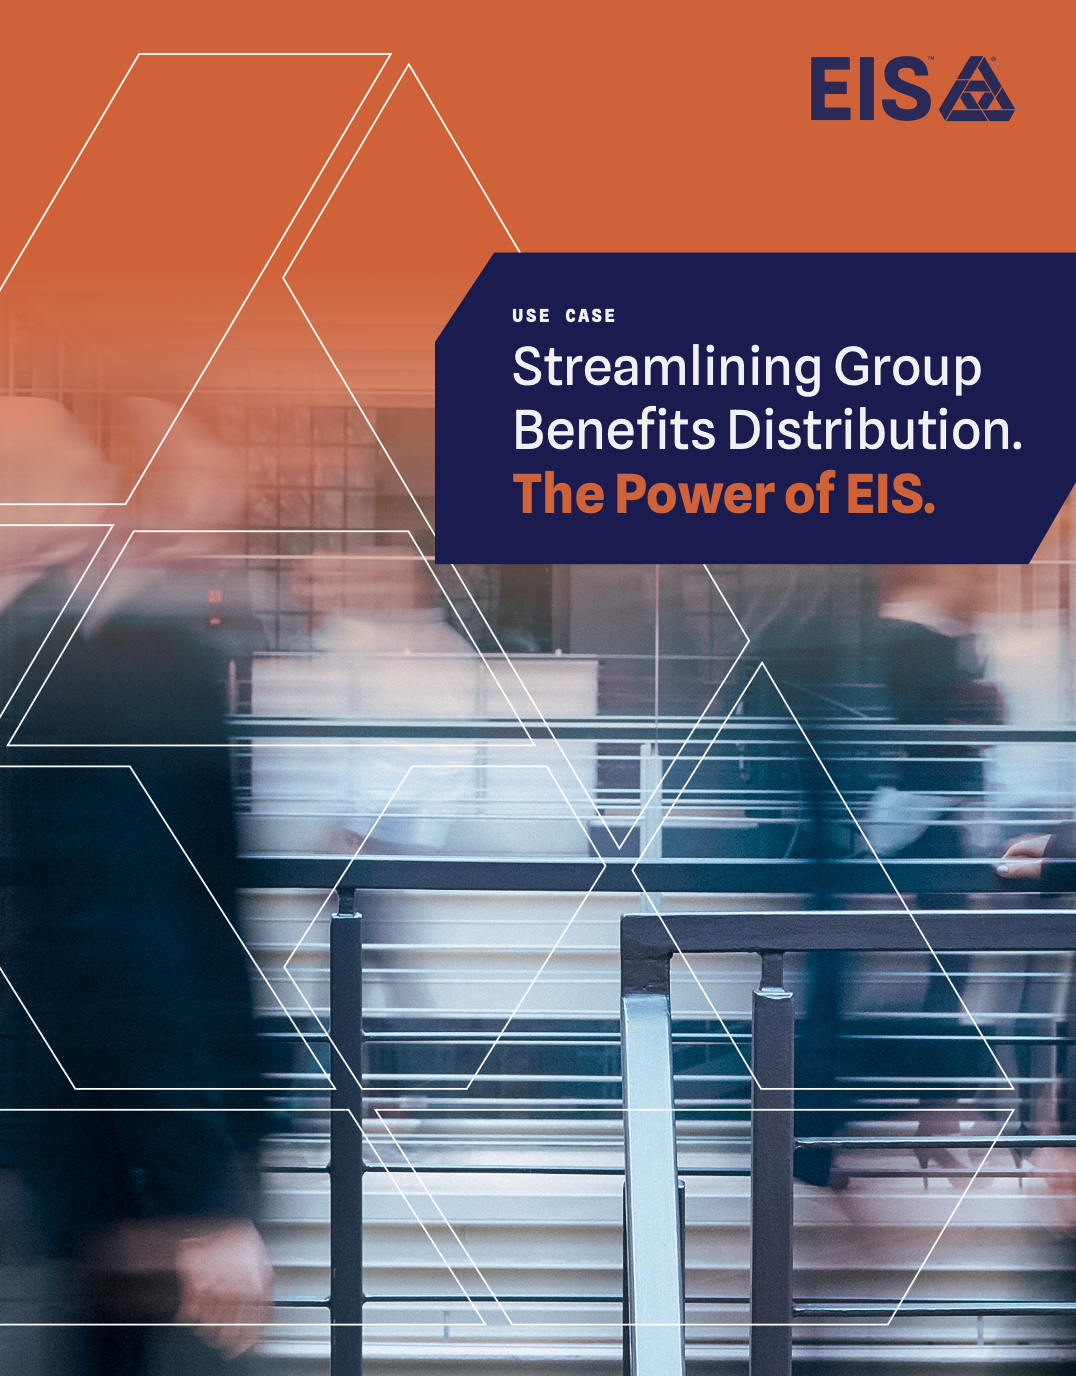 Streamlining Group Benefits Distribution. The Power of EIS.